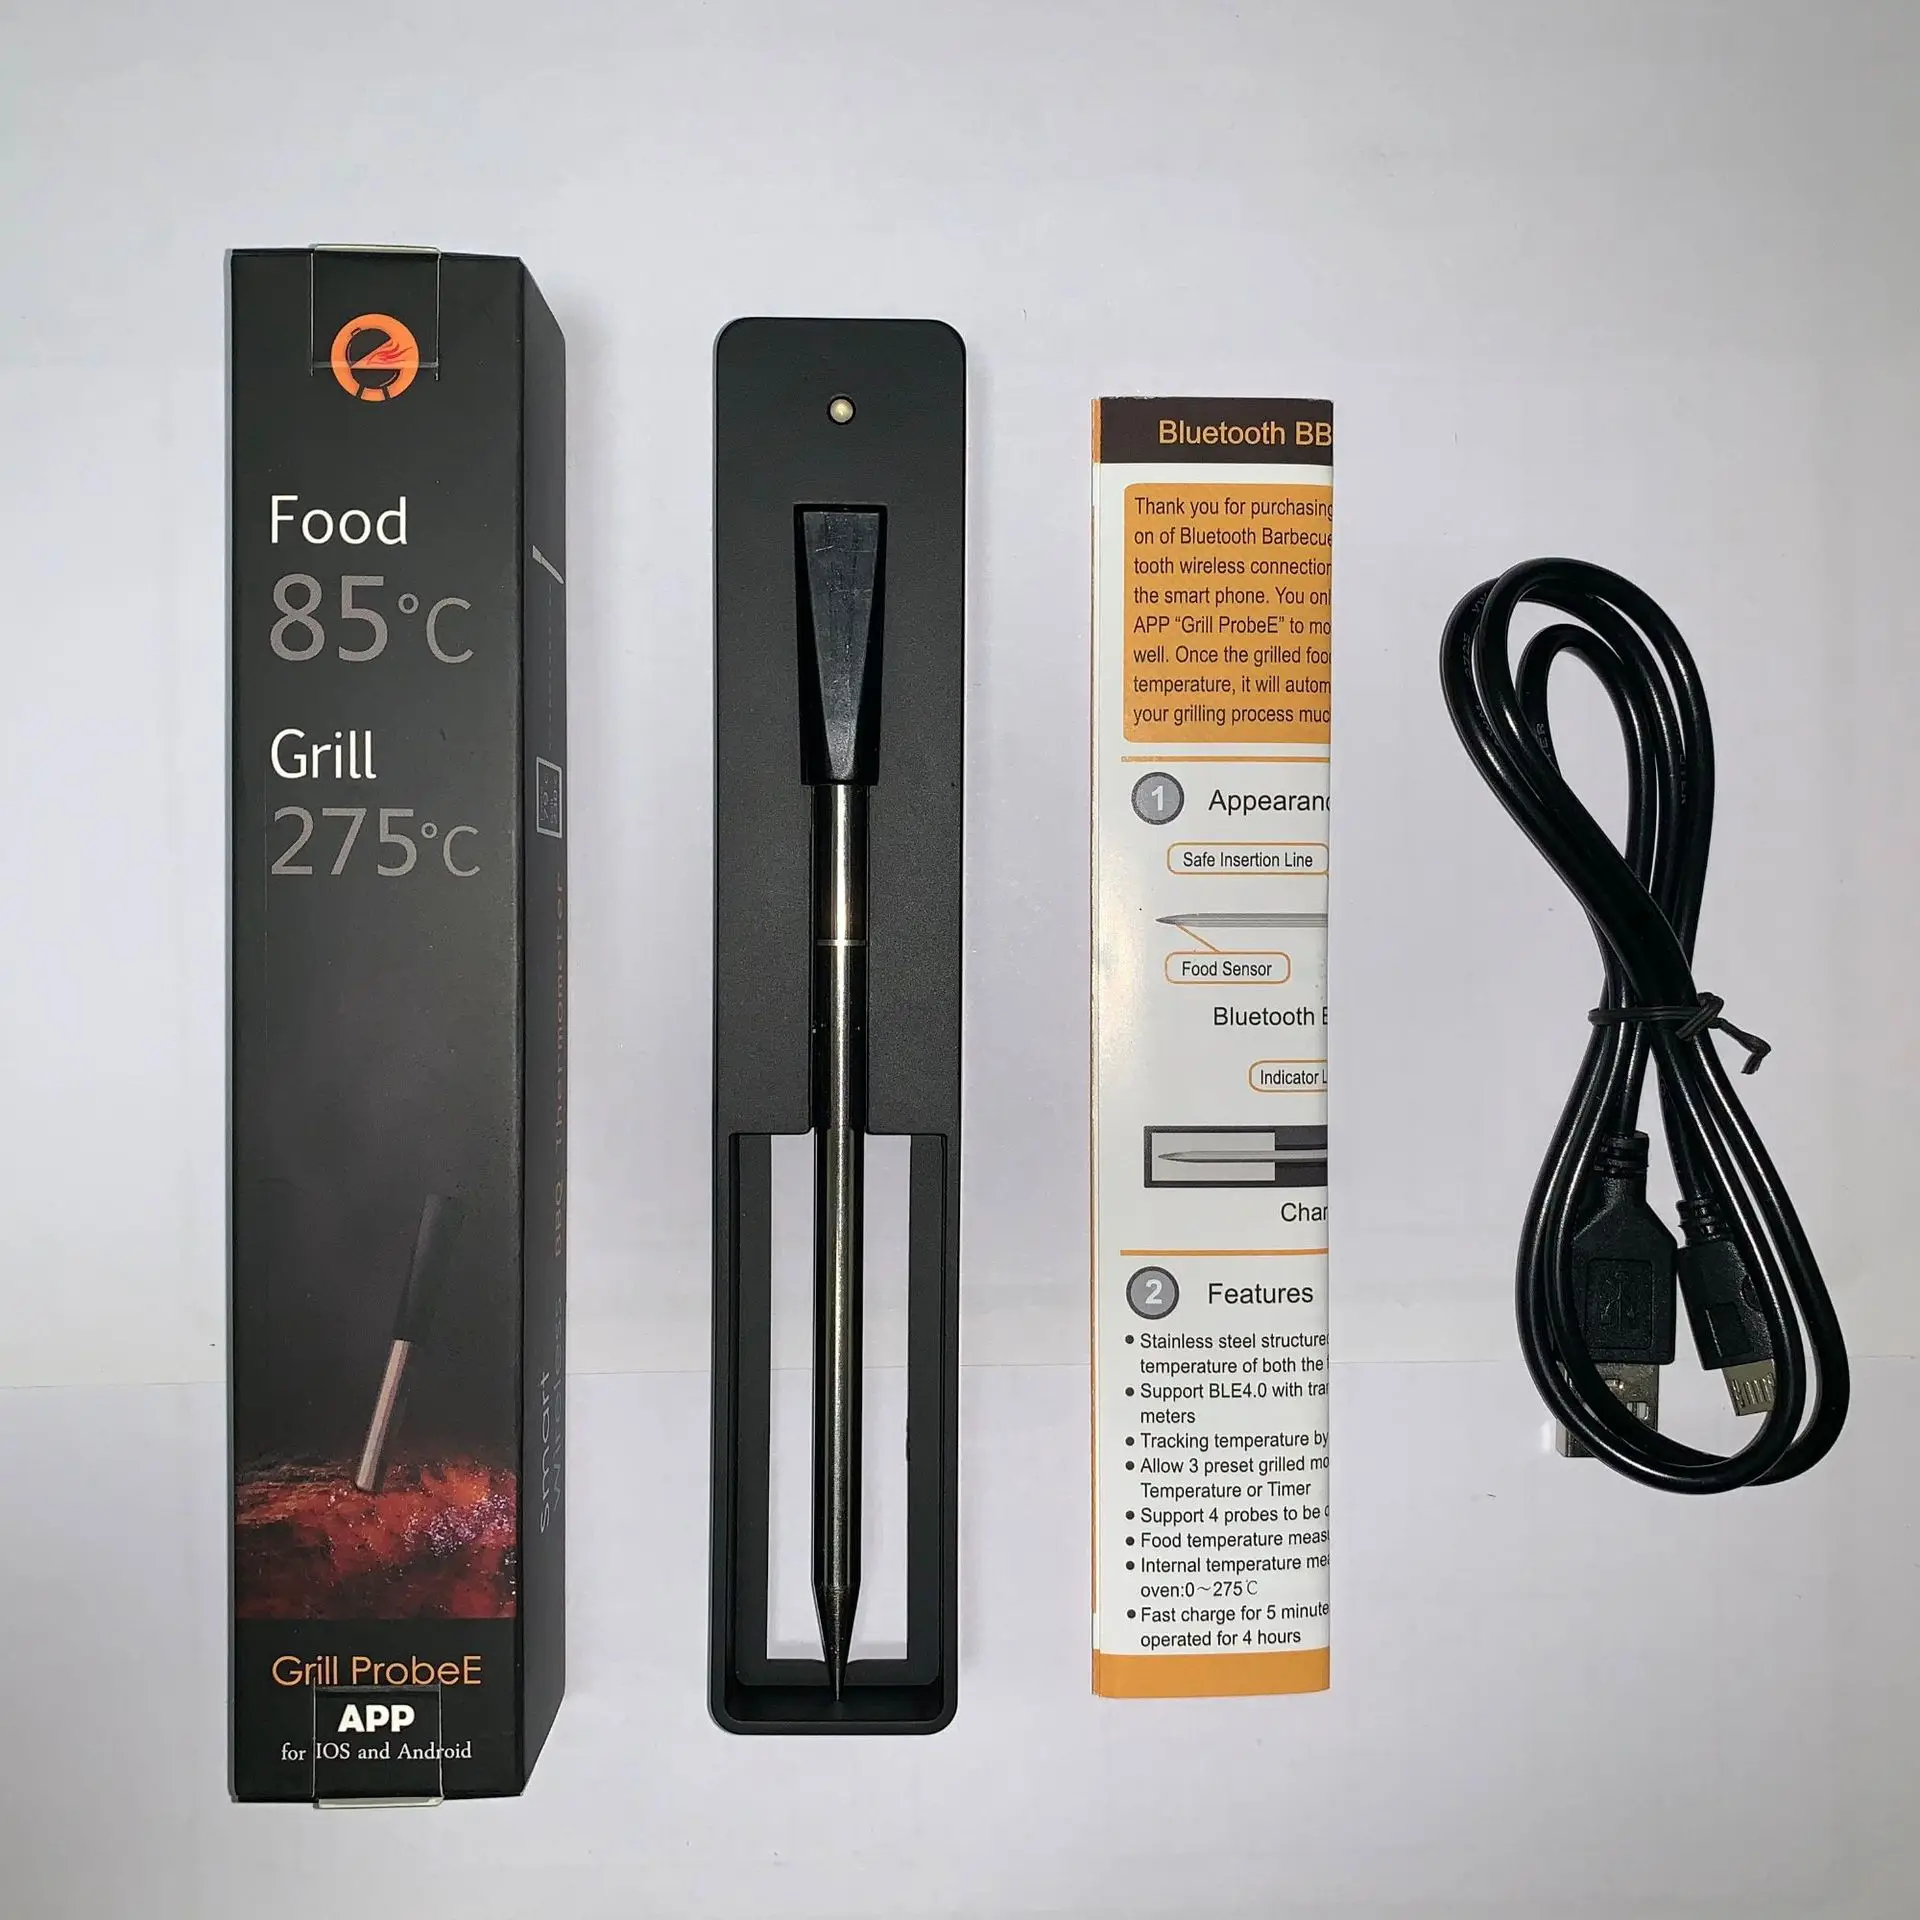 Kitchen Wireless Bluetooth Barbecue Smart BBQ Food Oven Thermometer Probe App Control enlarge